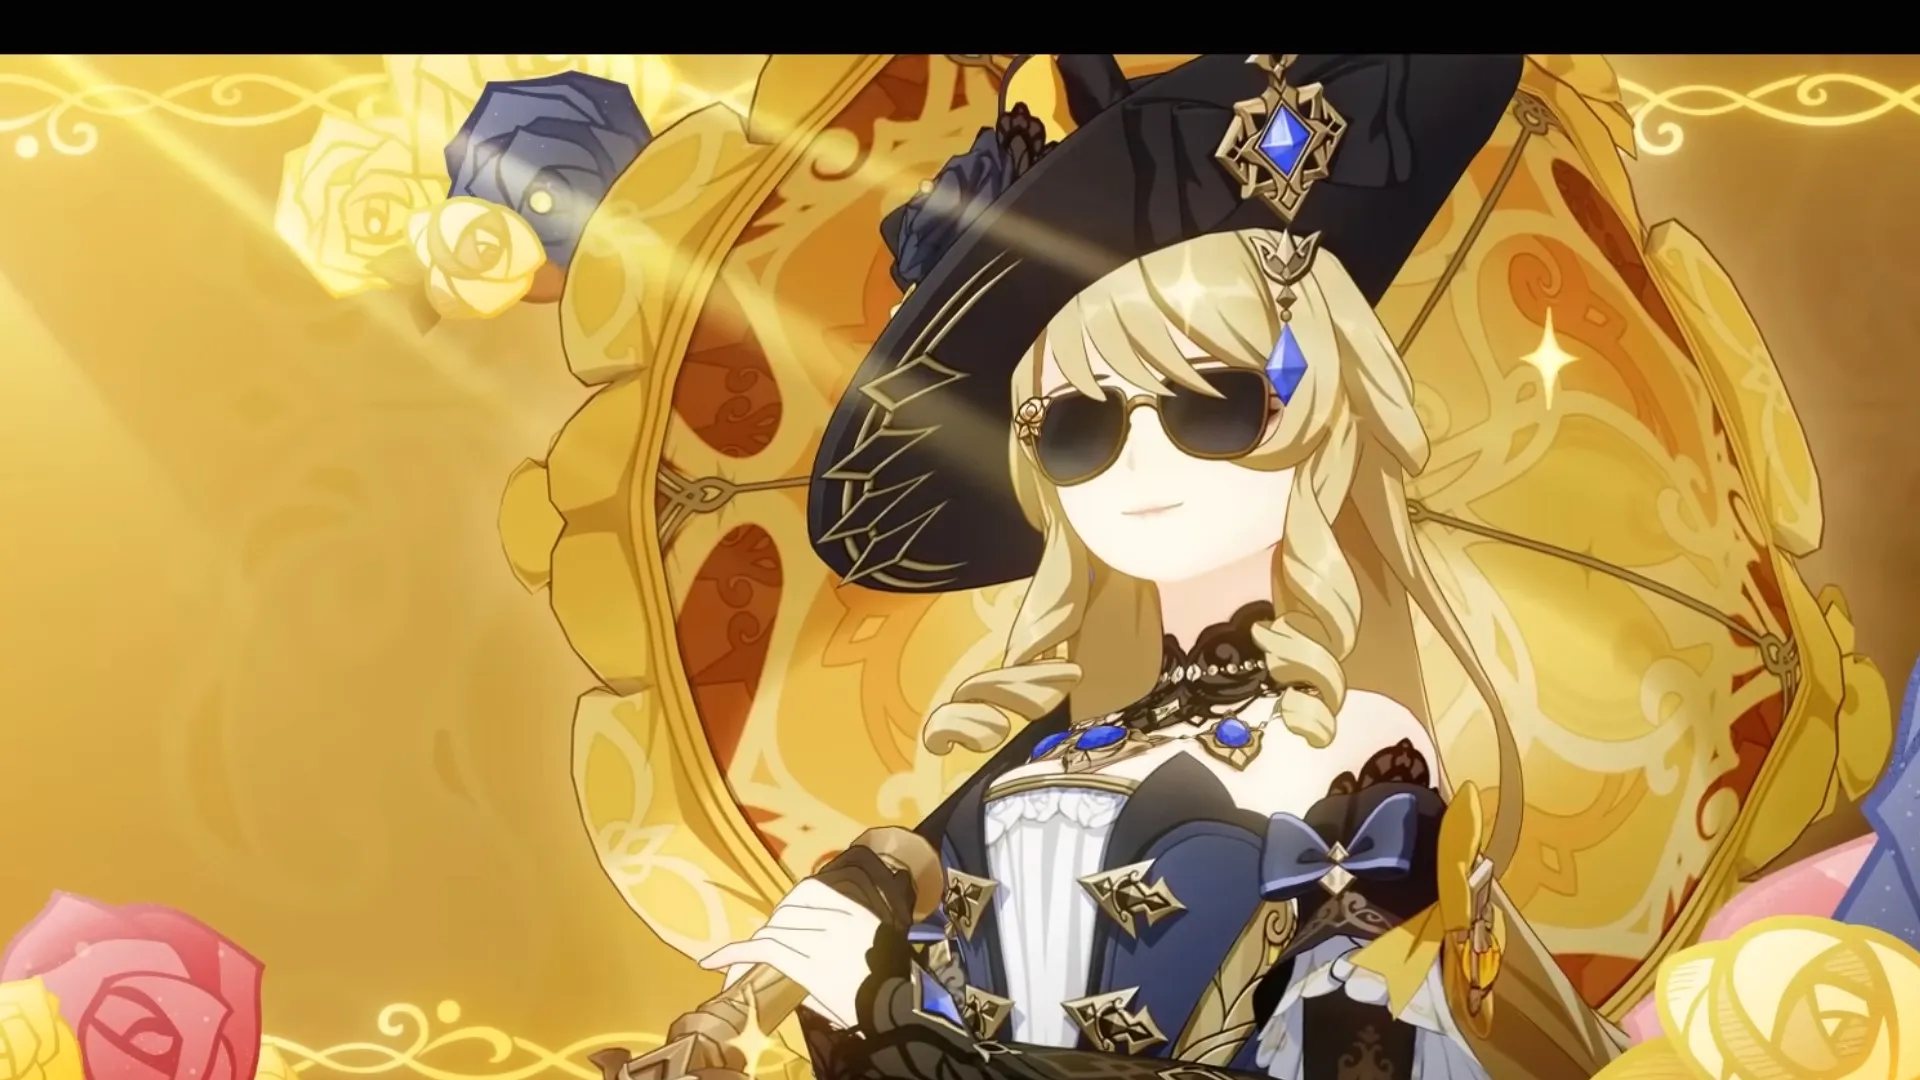 Navia holds a parasol and wears sunglasses in Genshin Impact.